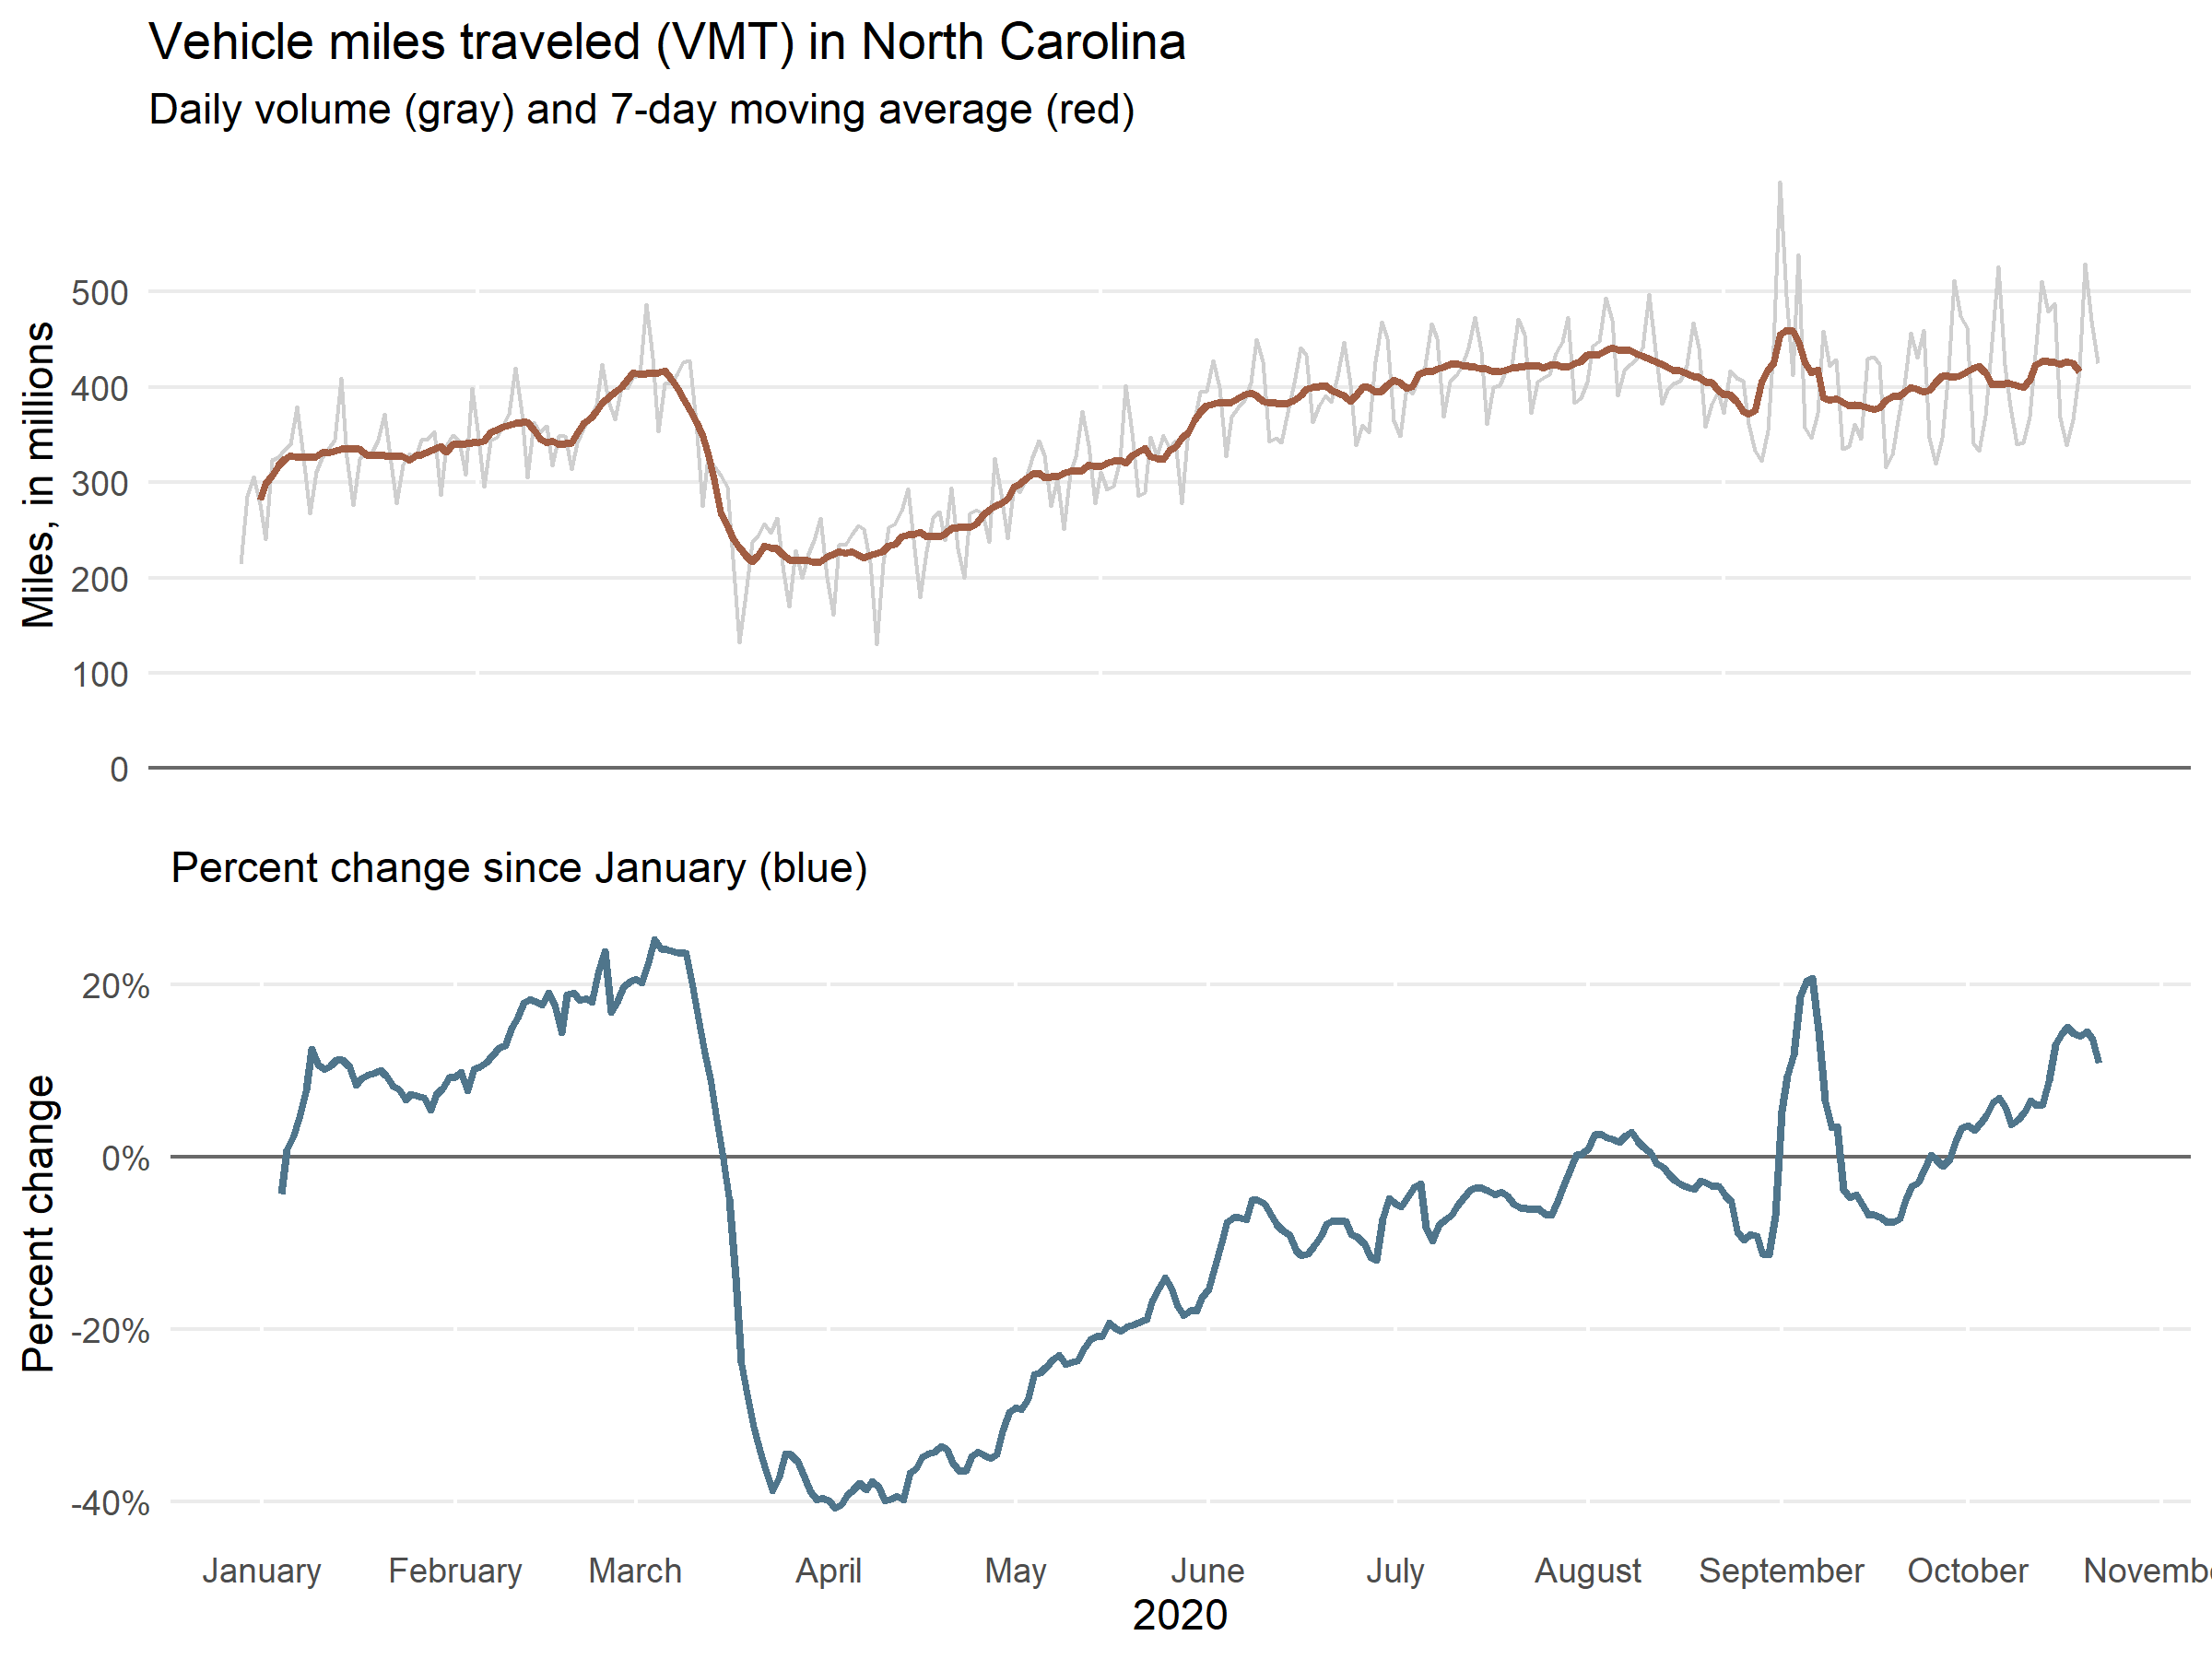 Figure 1: Daily VMT, 7-day Moving Average of Daily VMT and Percent change in 7-day Moving Average Daily VMT for North Carolina